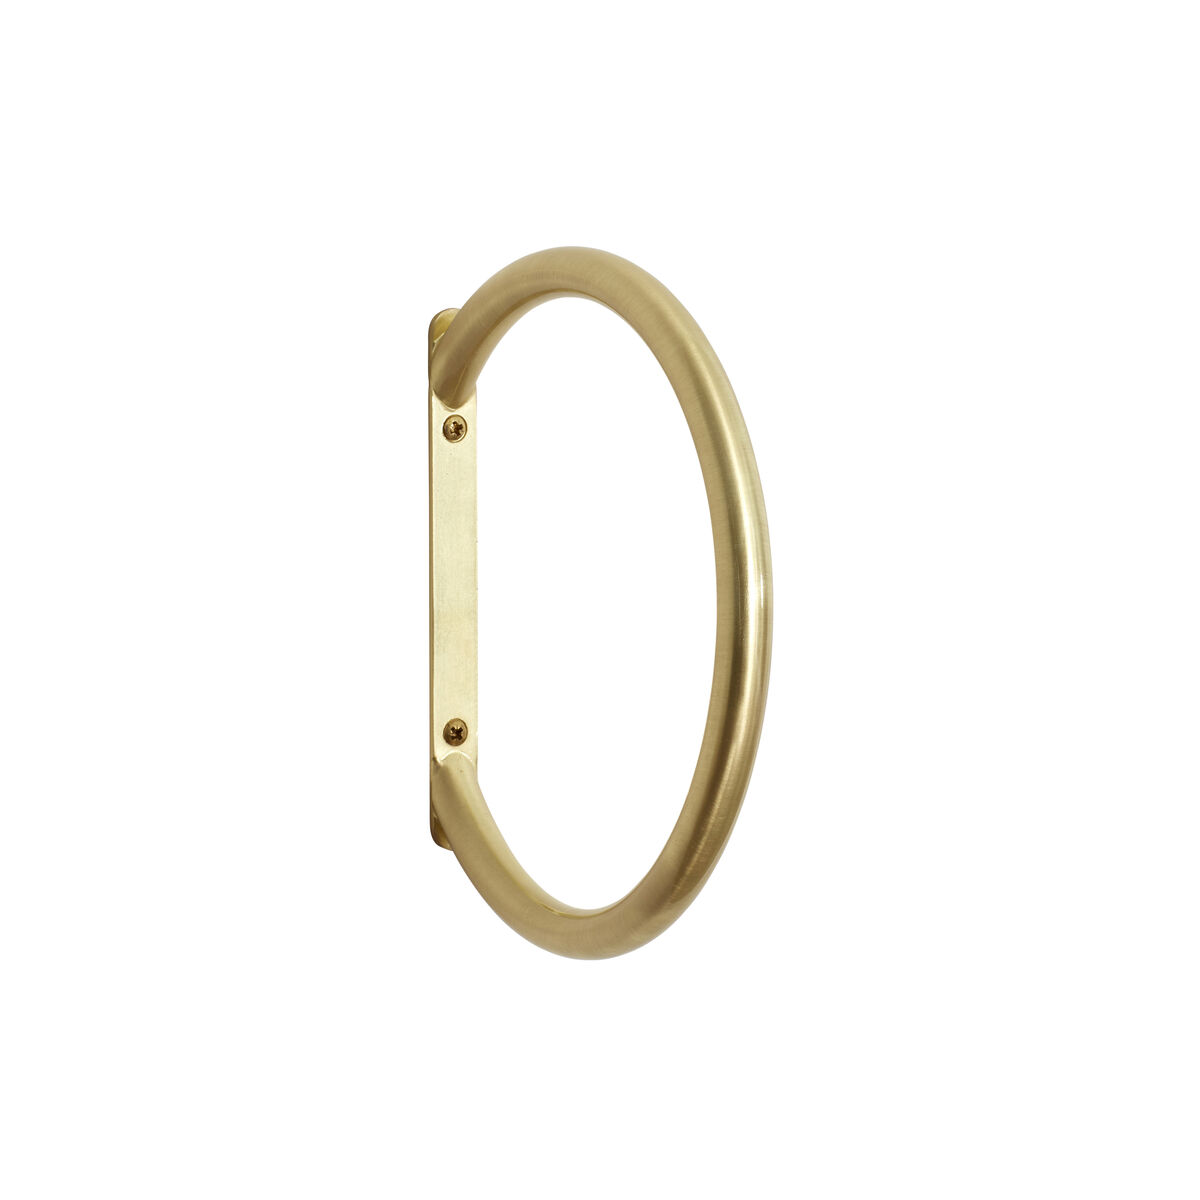 Hubsch Oval Towel Rack in Gold Plated Brass